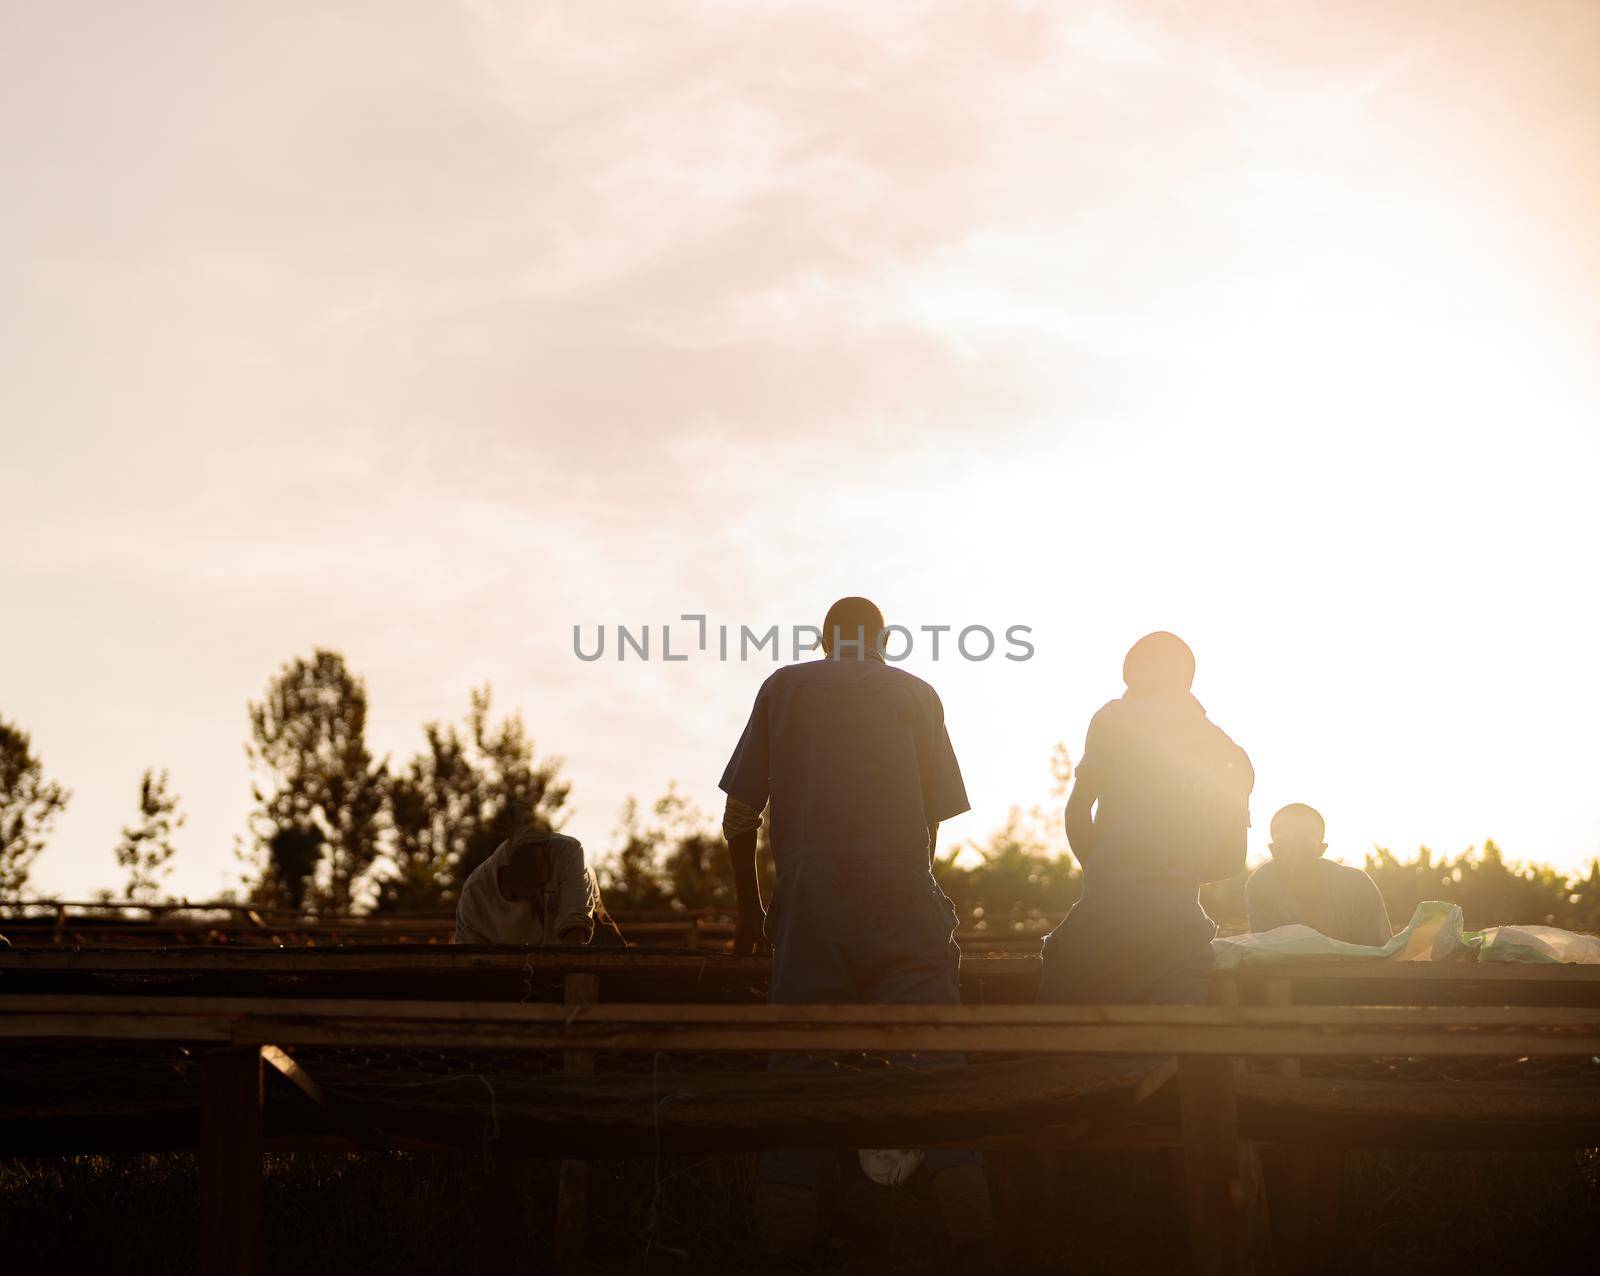 Workers working at the coffee washing station since dawn by Yaroslav_astakhov